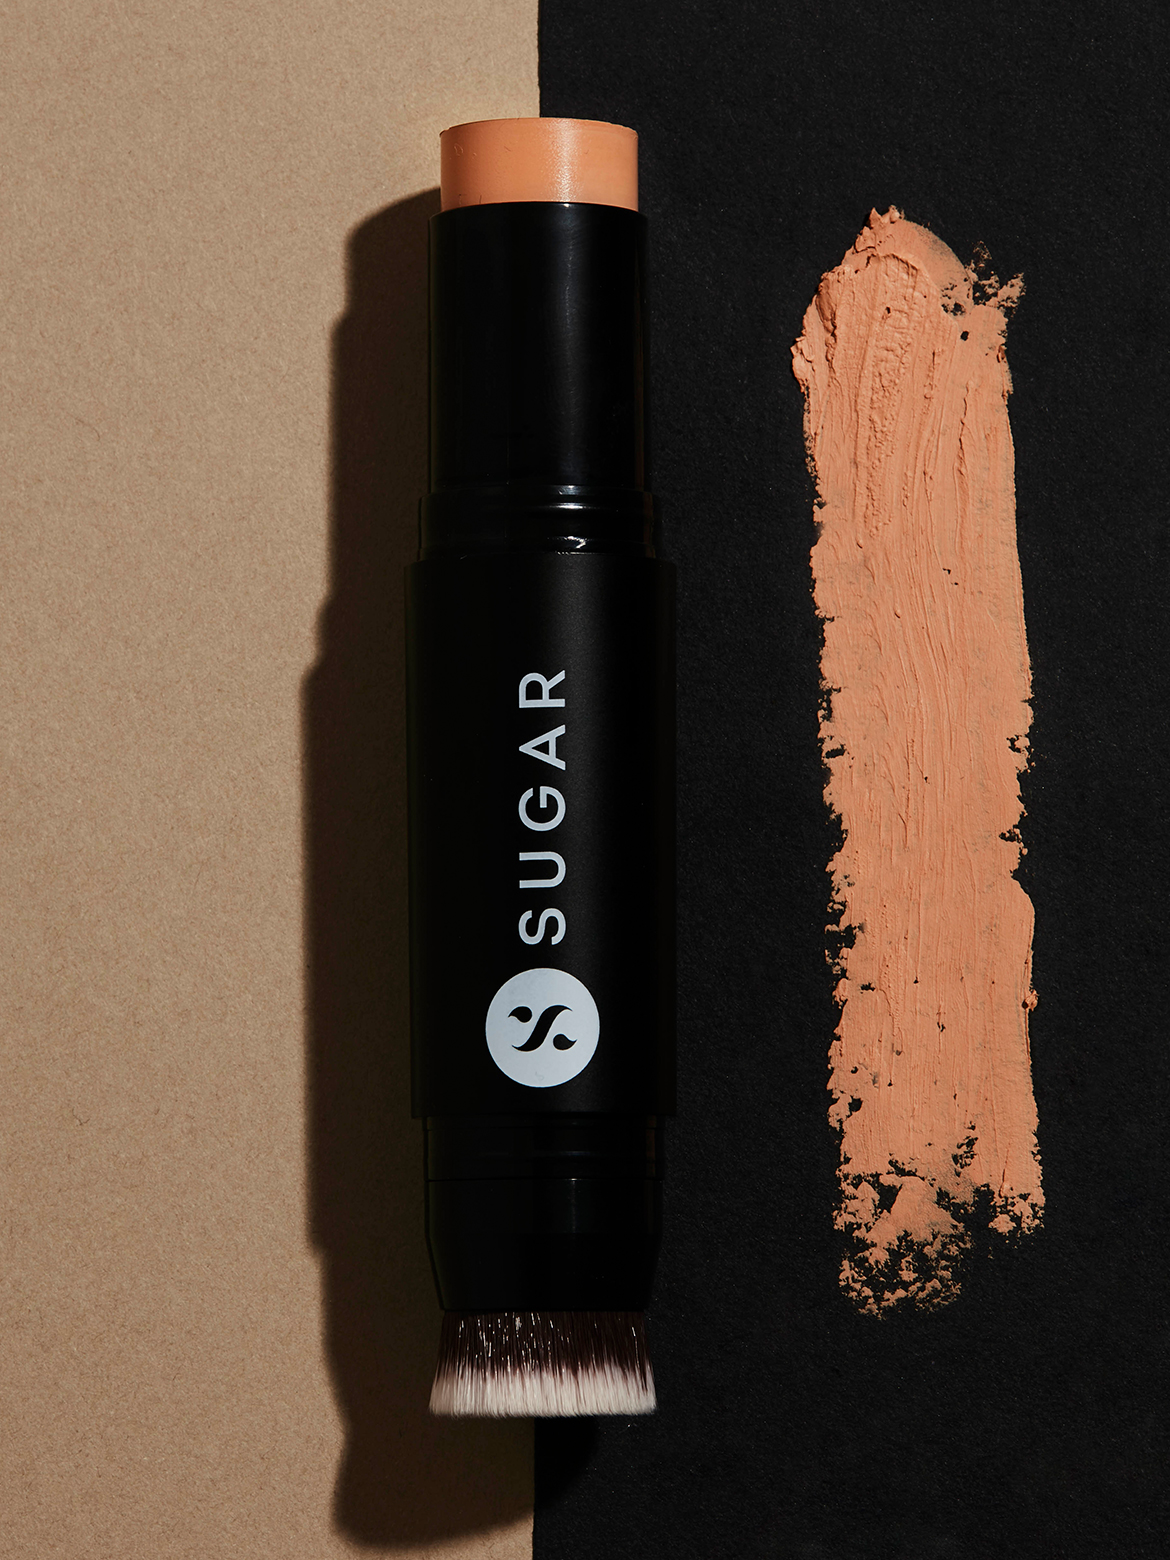 How to find a spot-on foundation shade every single time